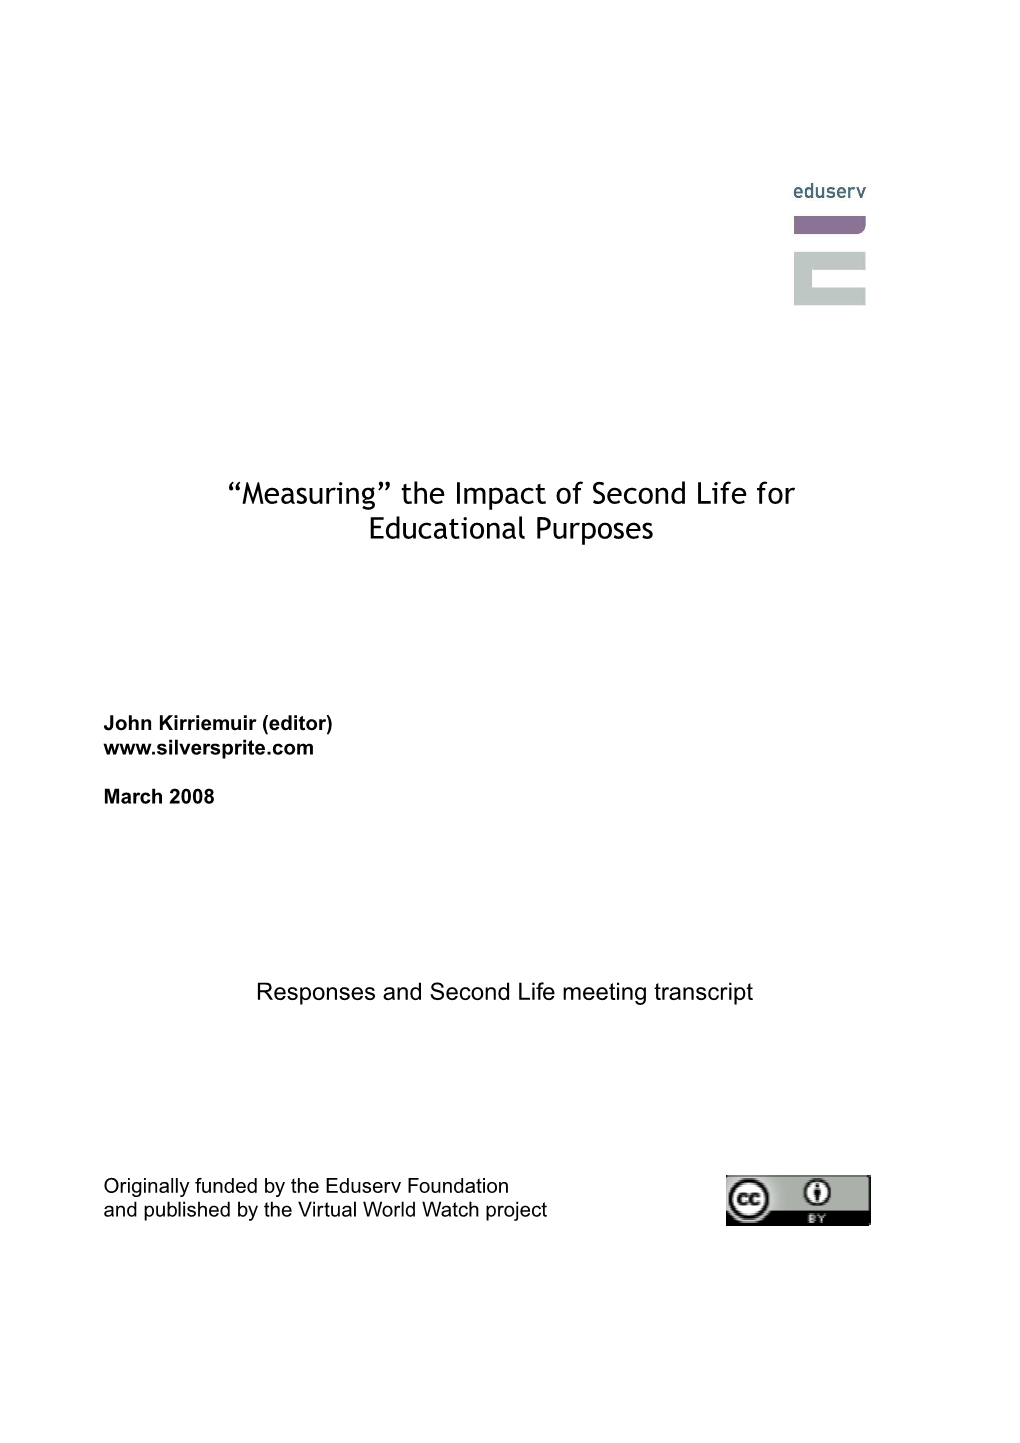 Measuring the Impact of Second Life for Educational Purposes